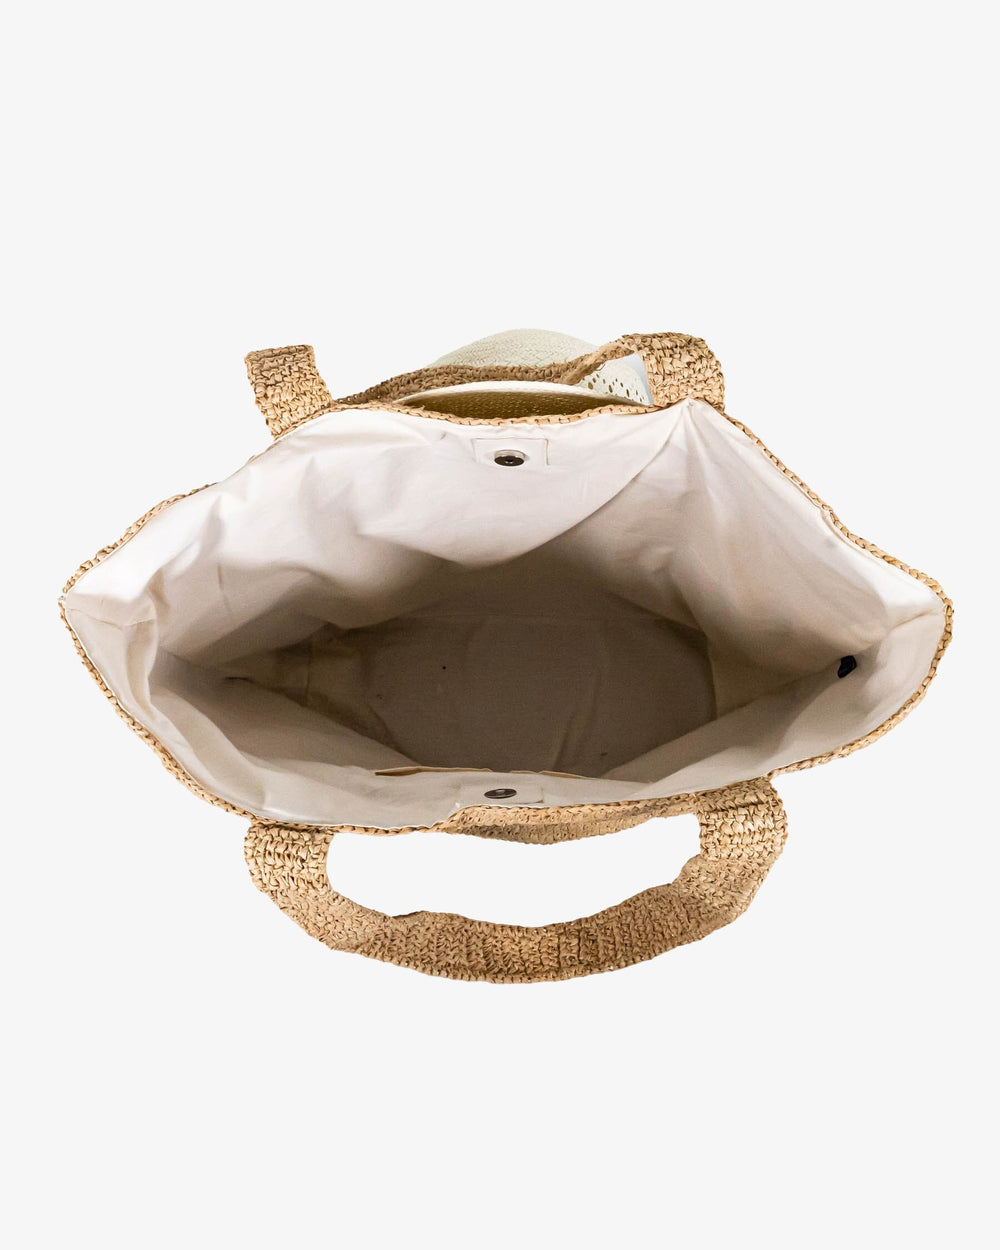 The detail view of the Southern Tide Straw Hat Carrier Beach Tote by Southern Tide - Natural